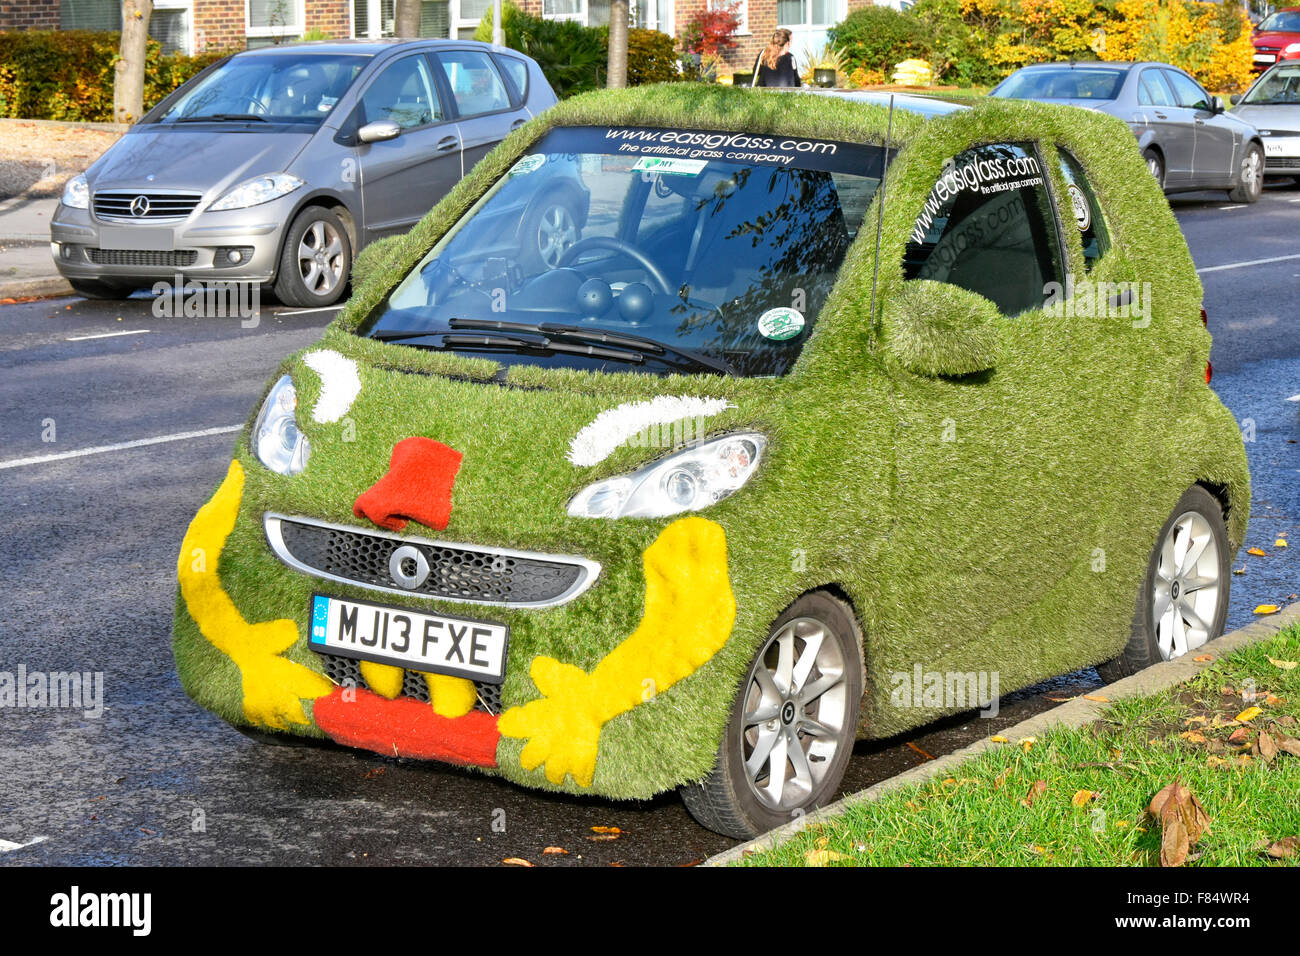 Smart car covered in fake grass lawn unusuak mobile advertising for artificial grass material for gardens Essex England UK Stock Photo